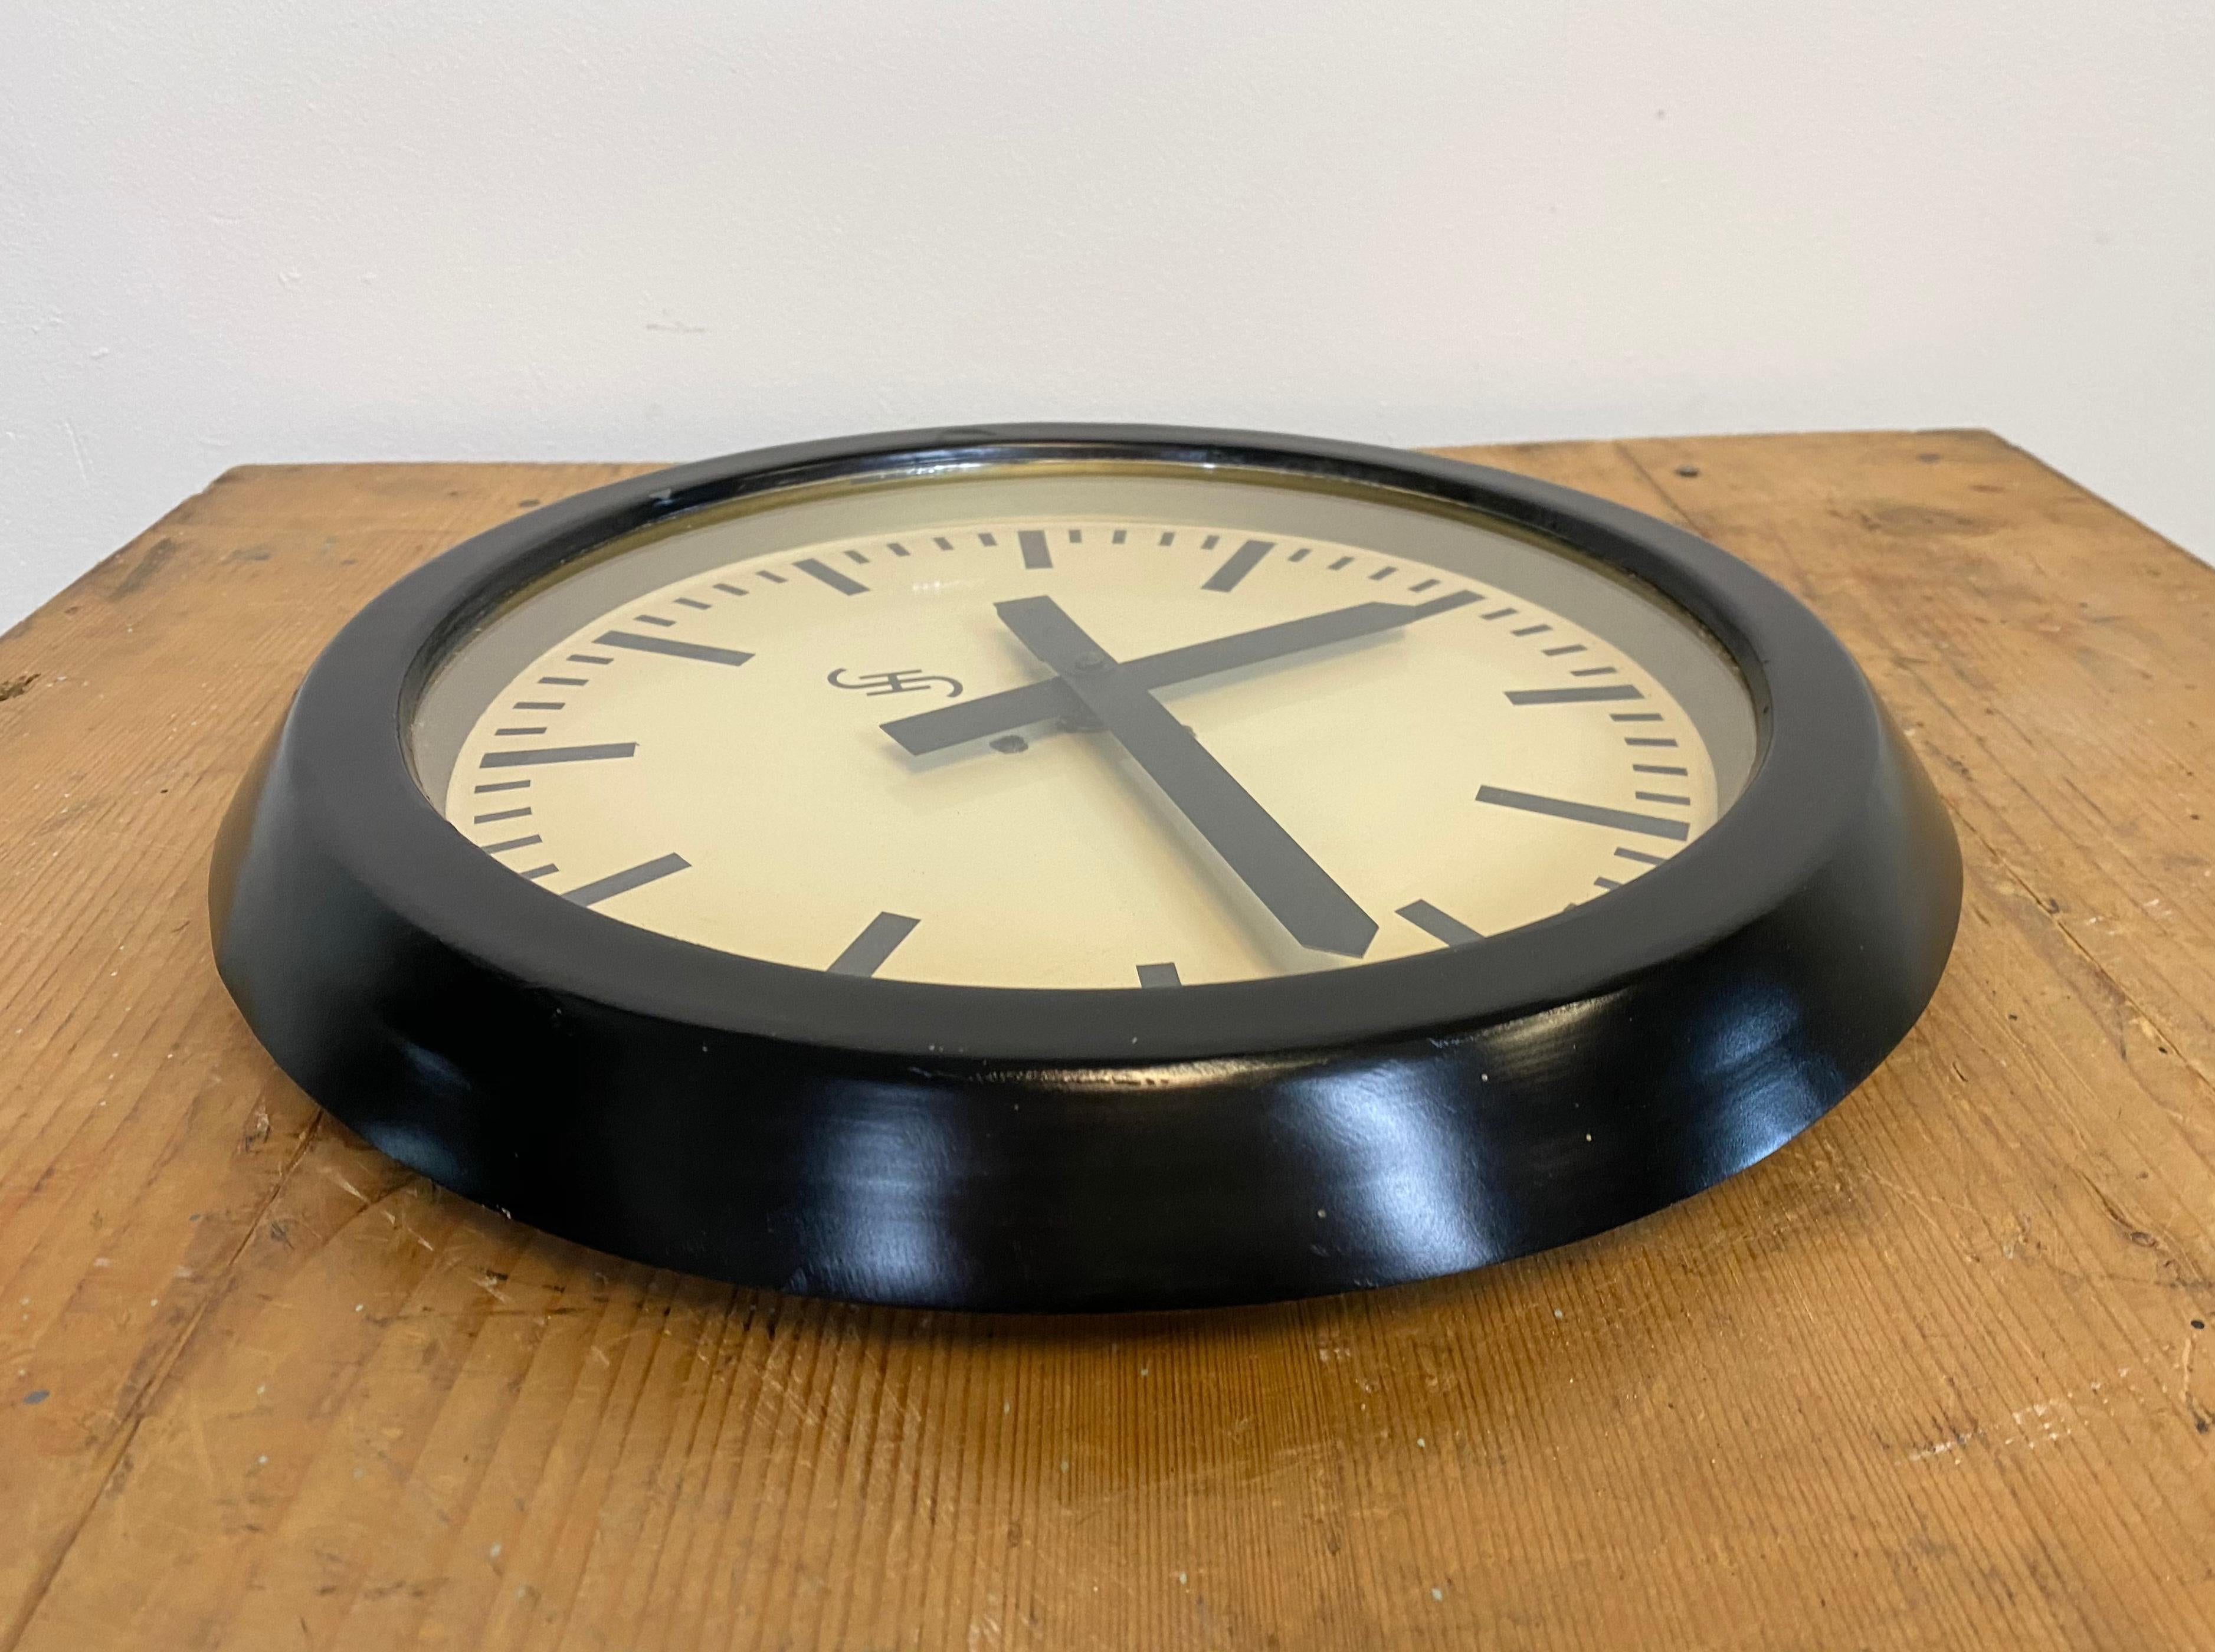 Glass Black Industrial Factory Wall Clock from Siemens, 1950s